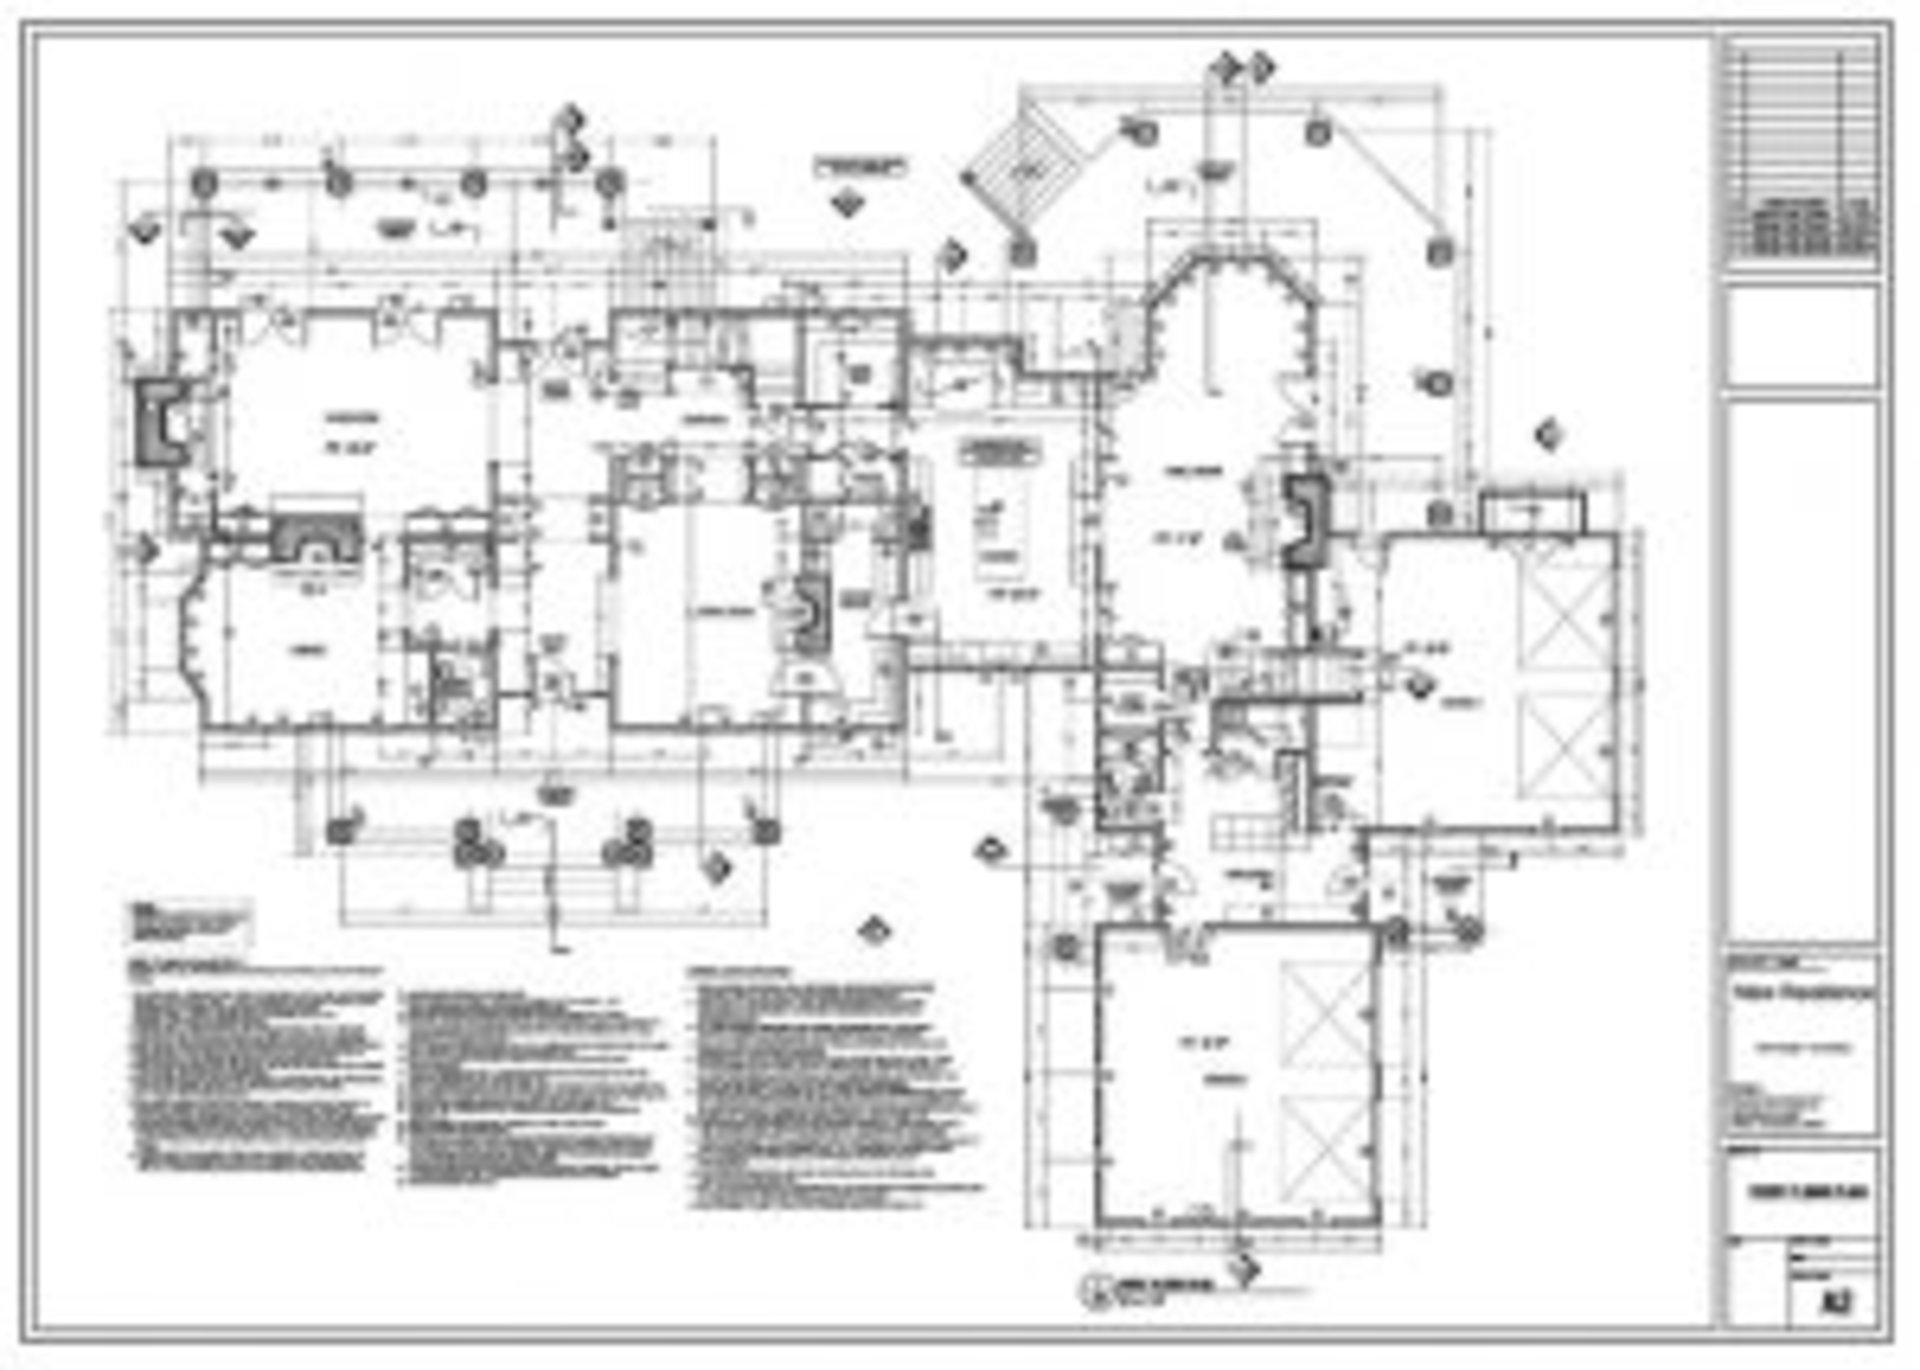 Architectural Construction Drawings